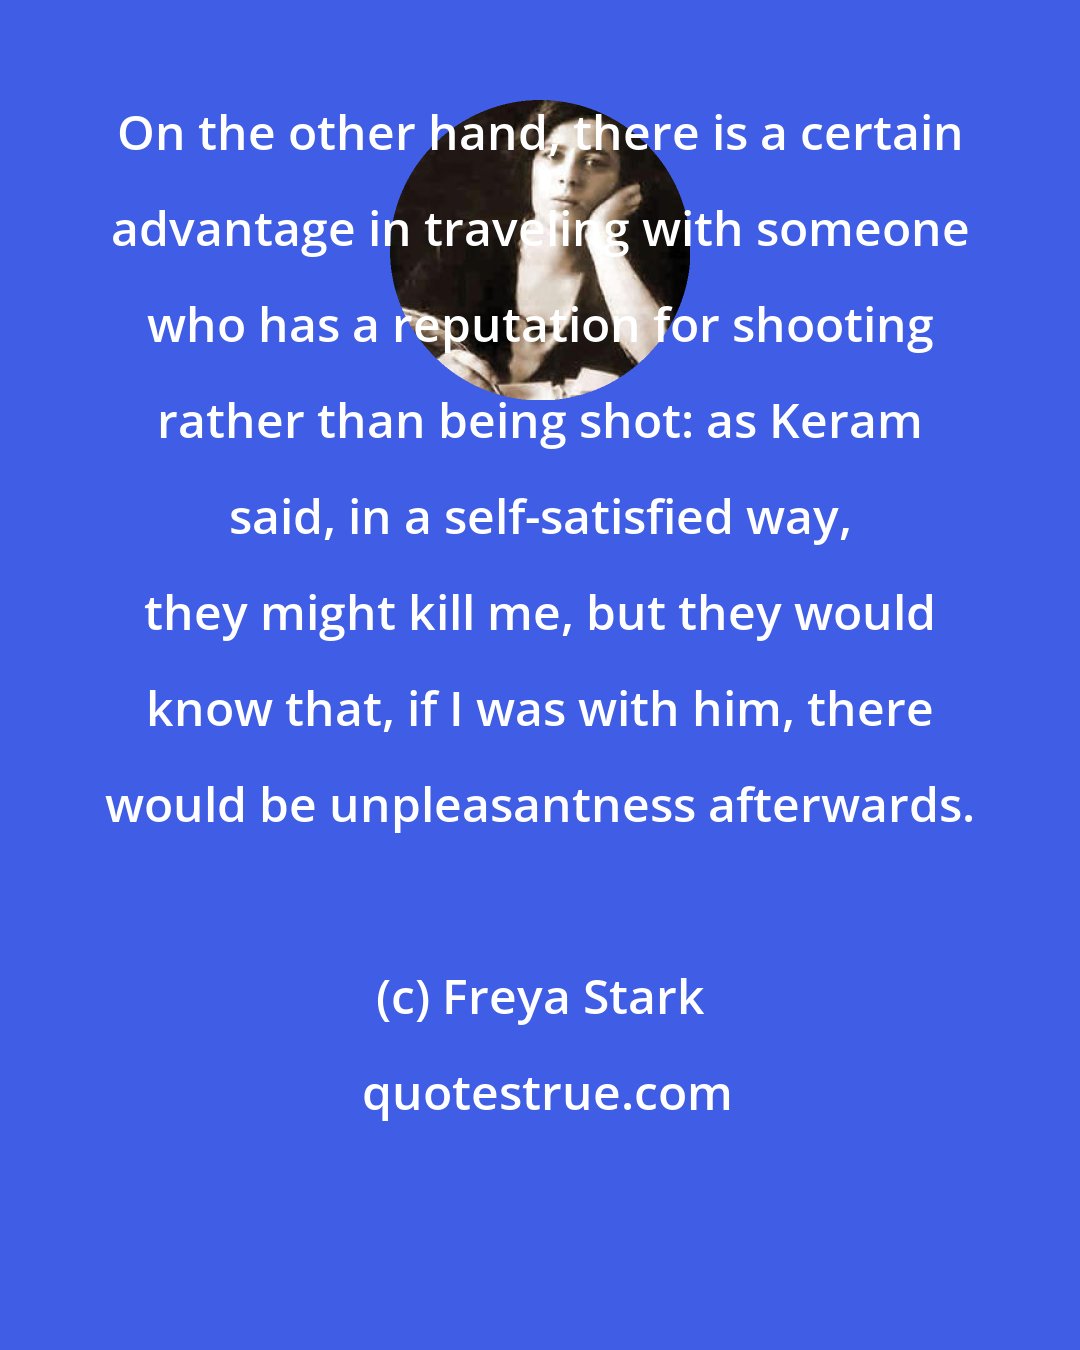 Freya Stark: On the other hand, there is a certain advantage in traveling with someone who has a reputation for shooting rather than being shot: as Keram said, in a self-satisfied way, they might kill me, but they would know that, if I was with him, there would be unpleasantness afterwards.